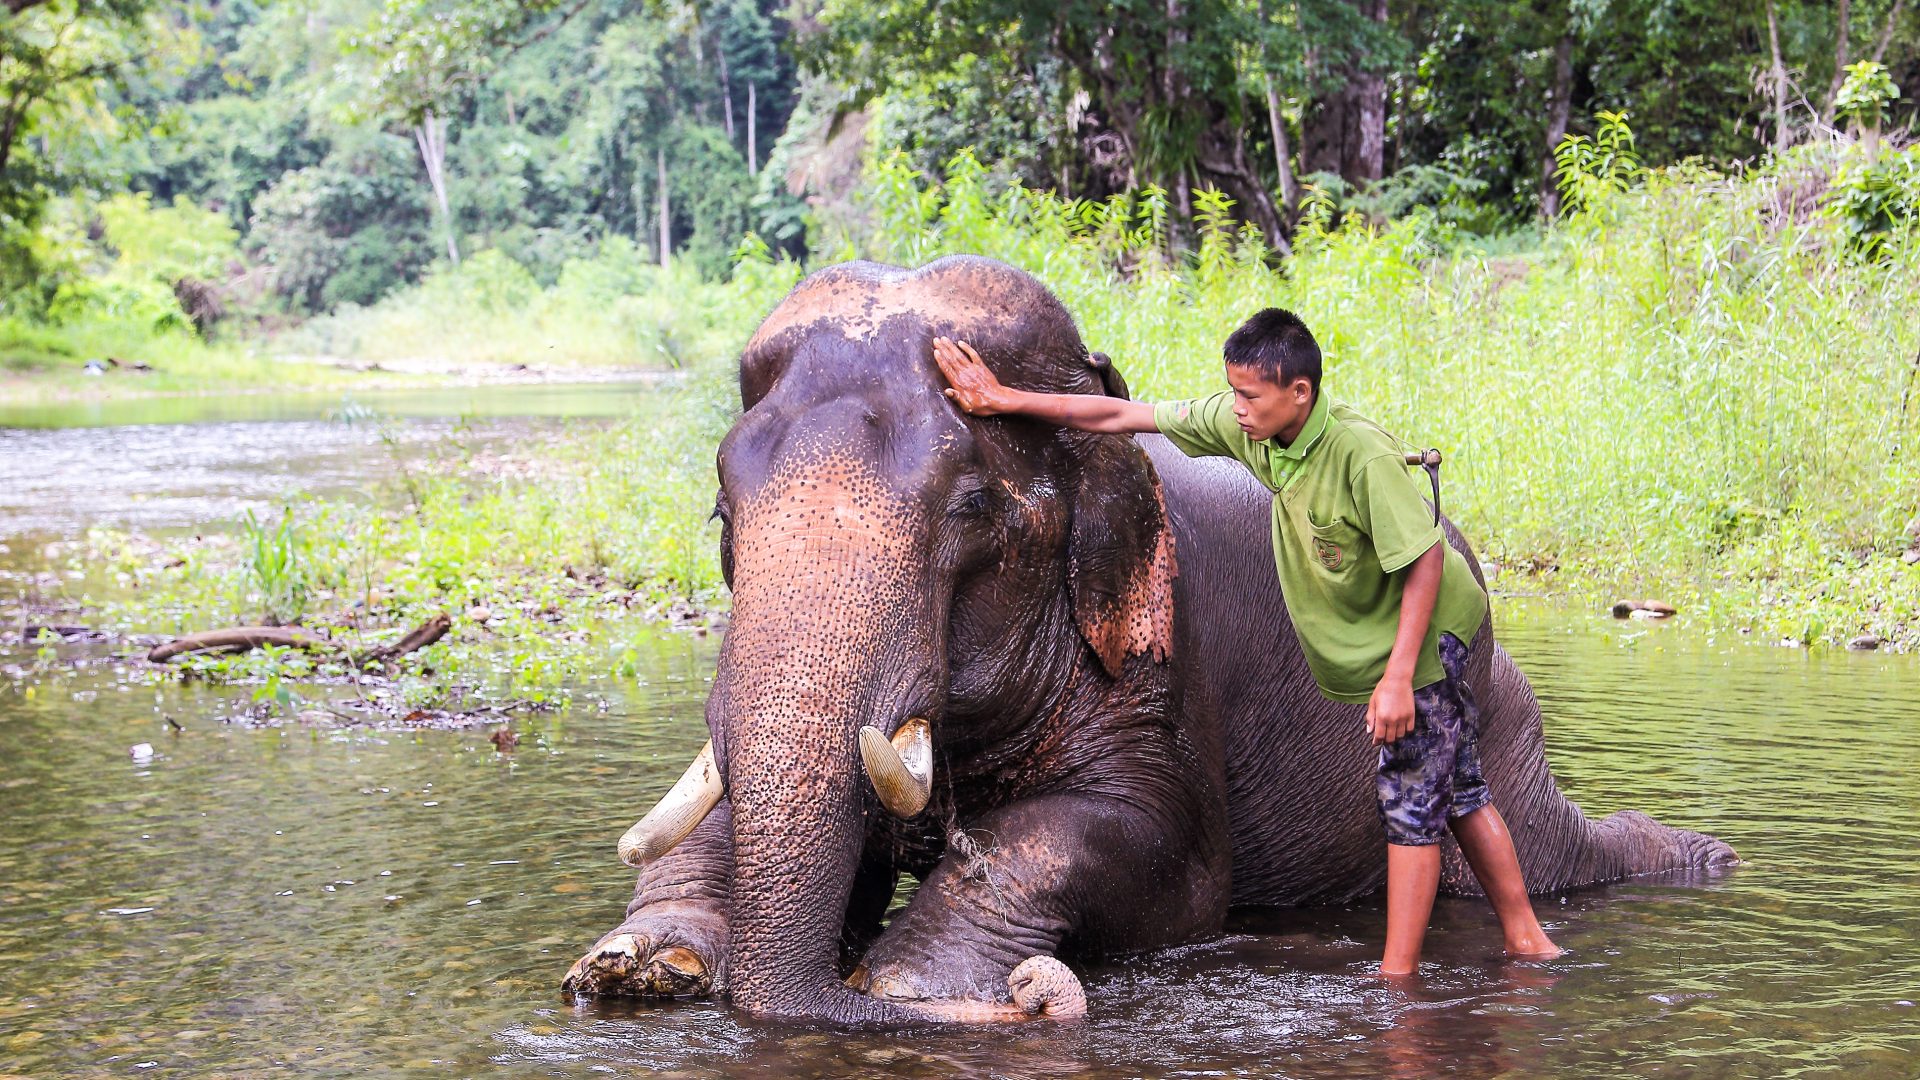 Mahout young boy and elephant in the forest